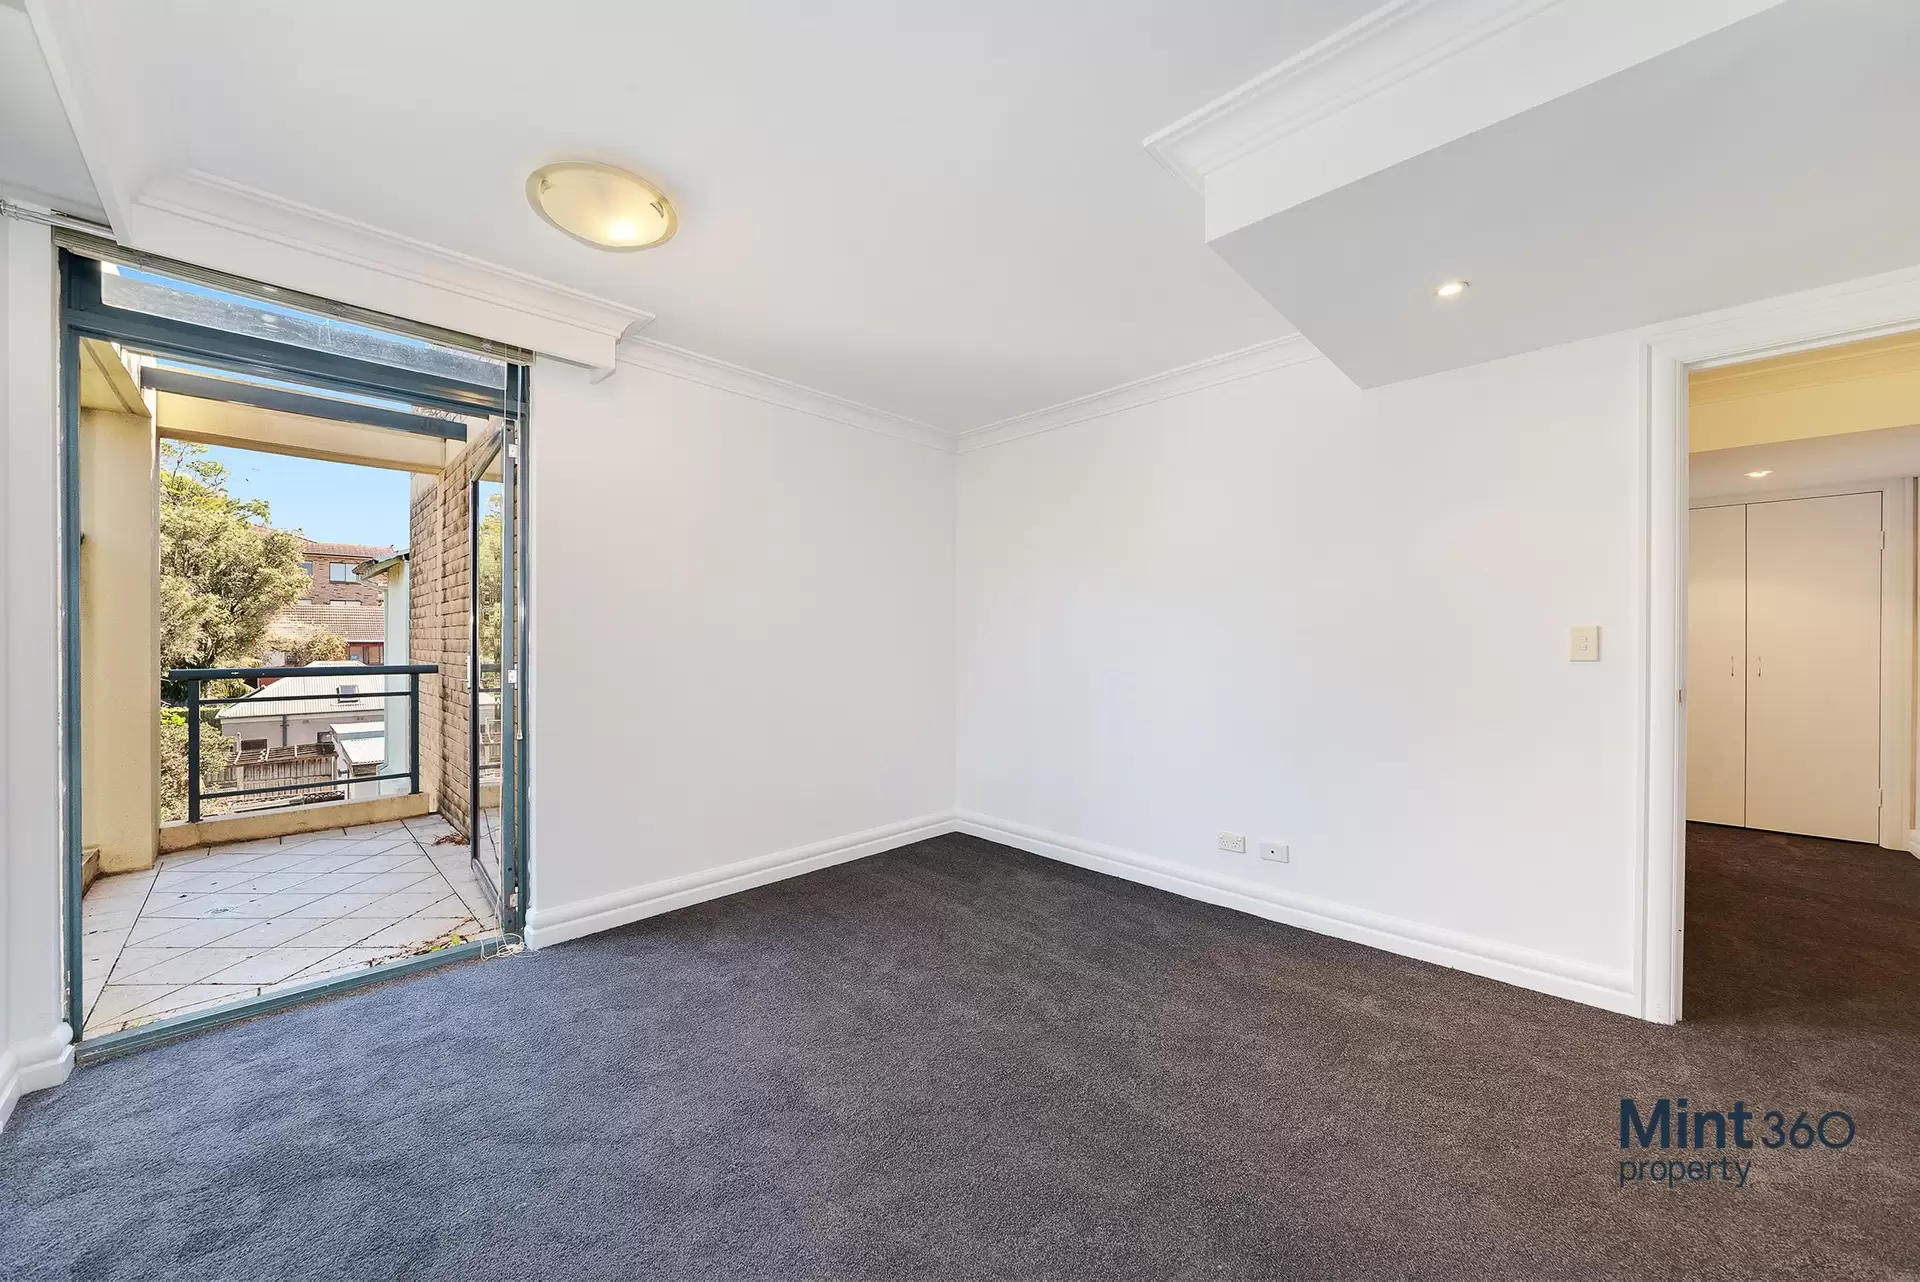 16/183 Coogee Bay Road, Coogee Leased by Raine & Horne Randwick | Coogee - image 1